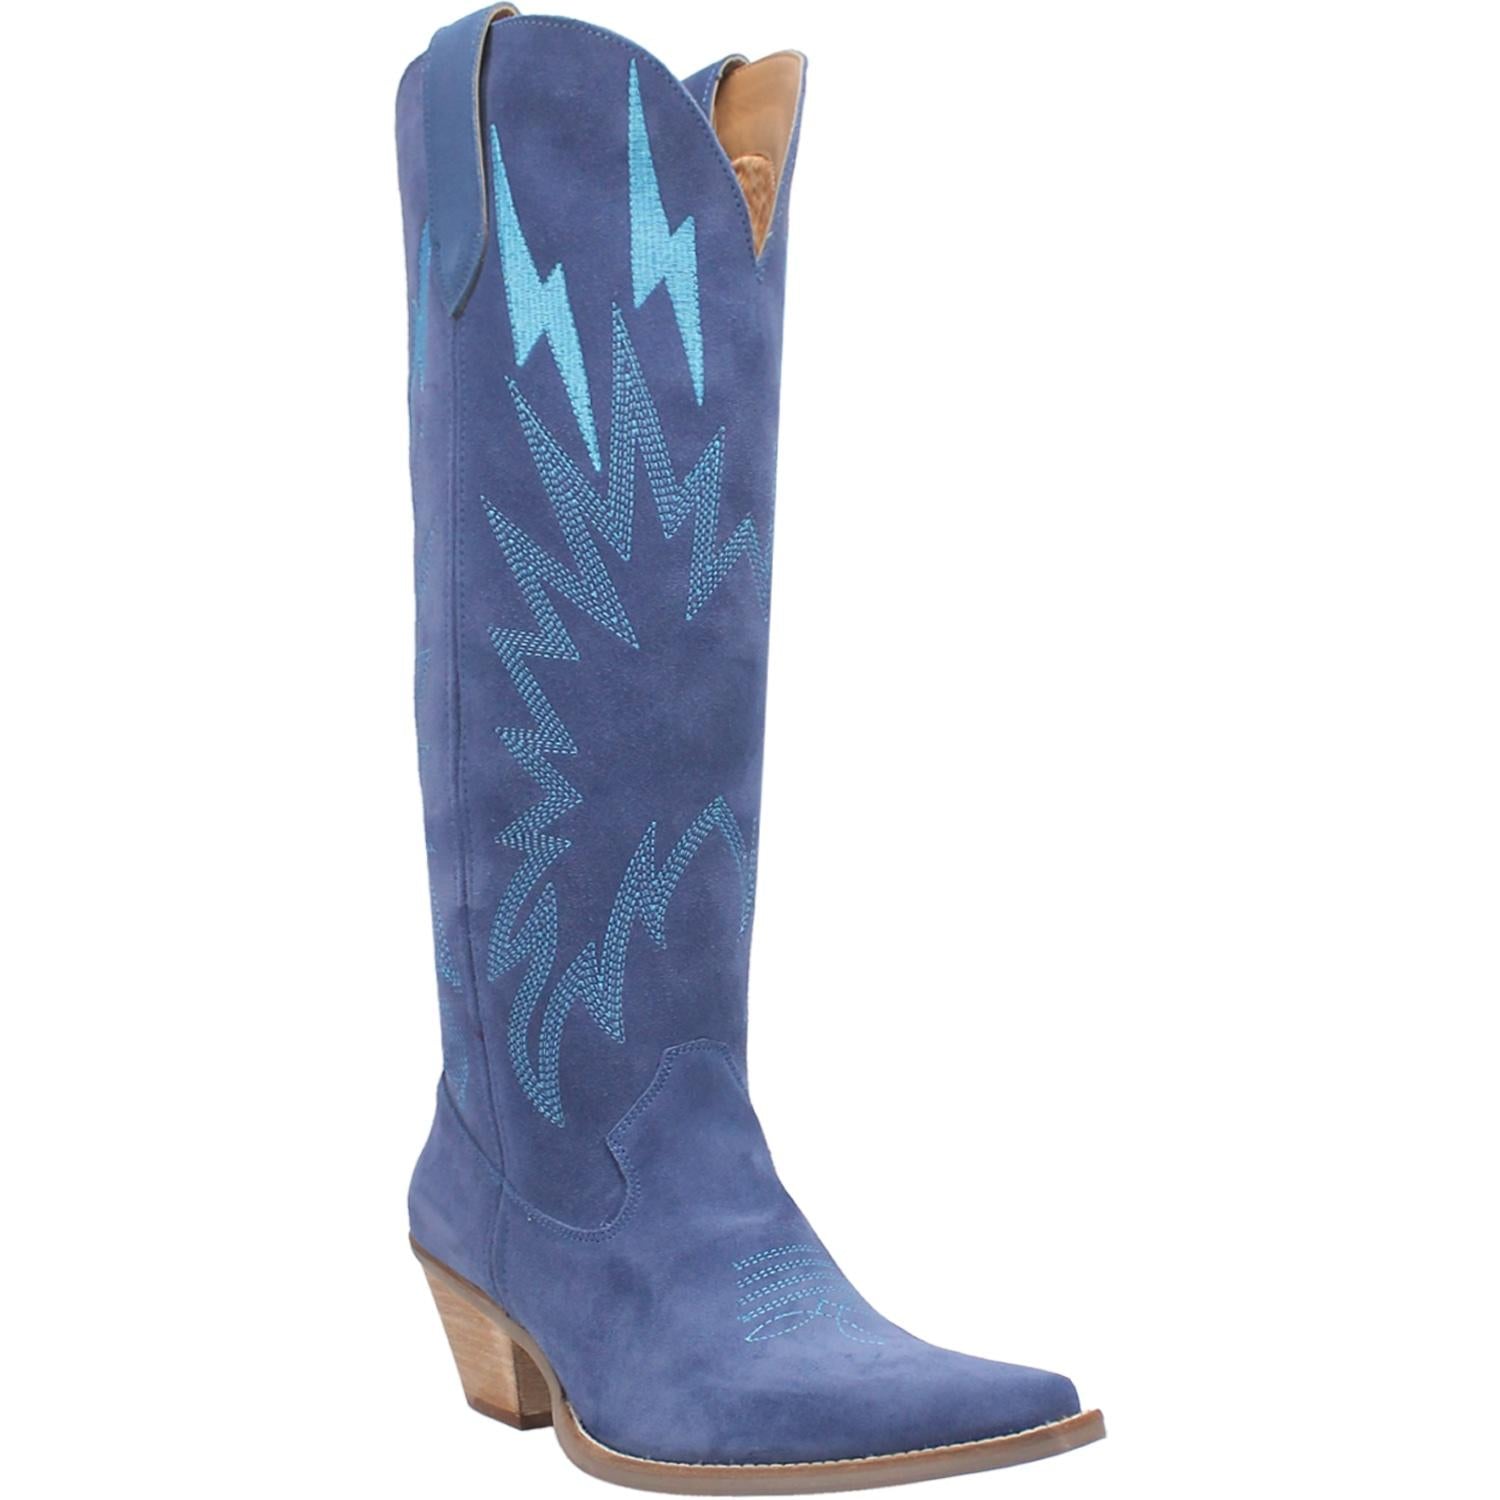 A tall blue boot featuring rhinestone lightning designs, small heel, leather straps, and a V cut at the top. Item is pictured on a plain white background